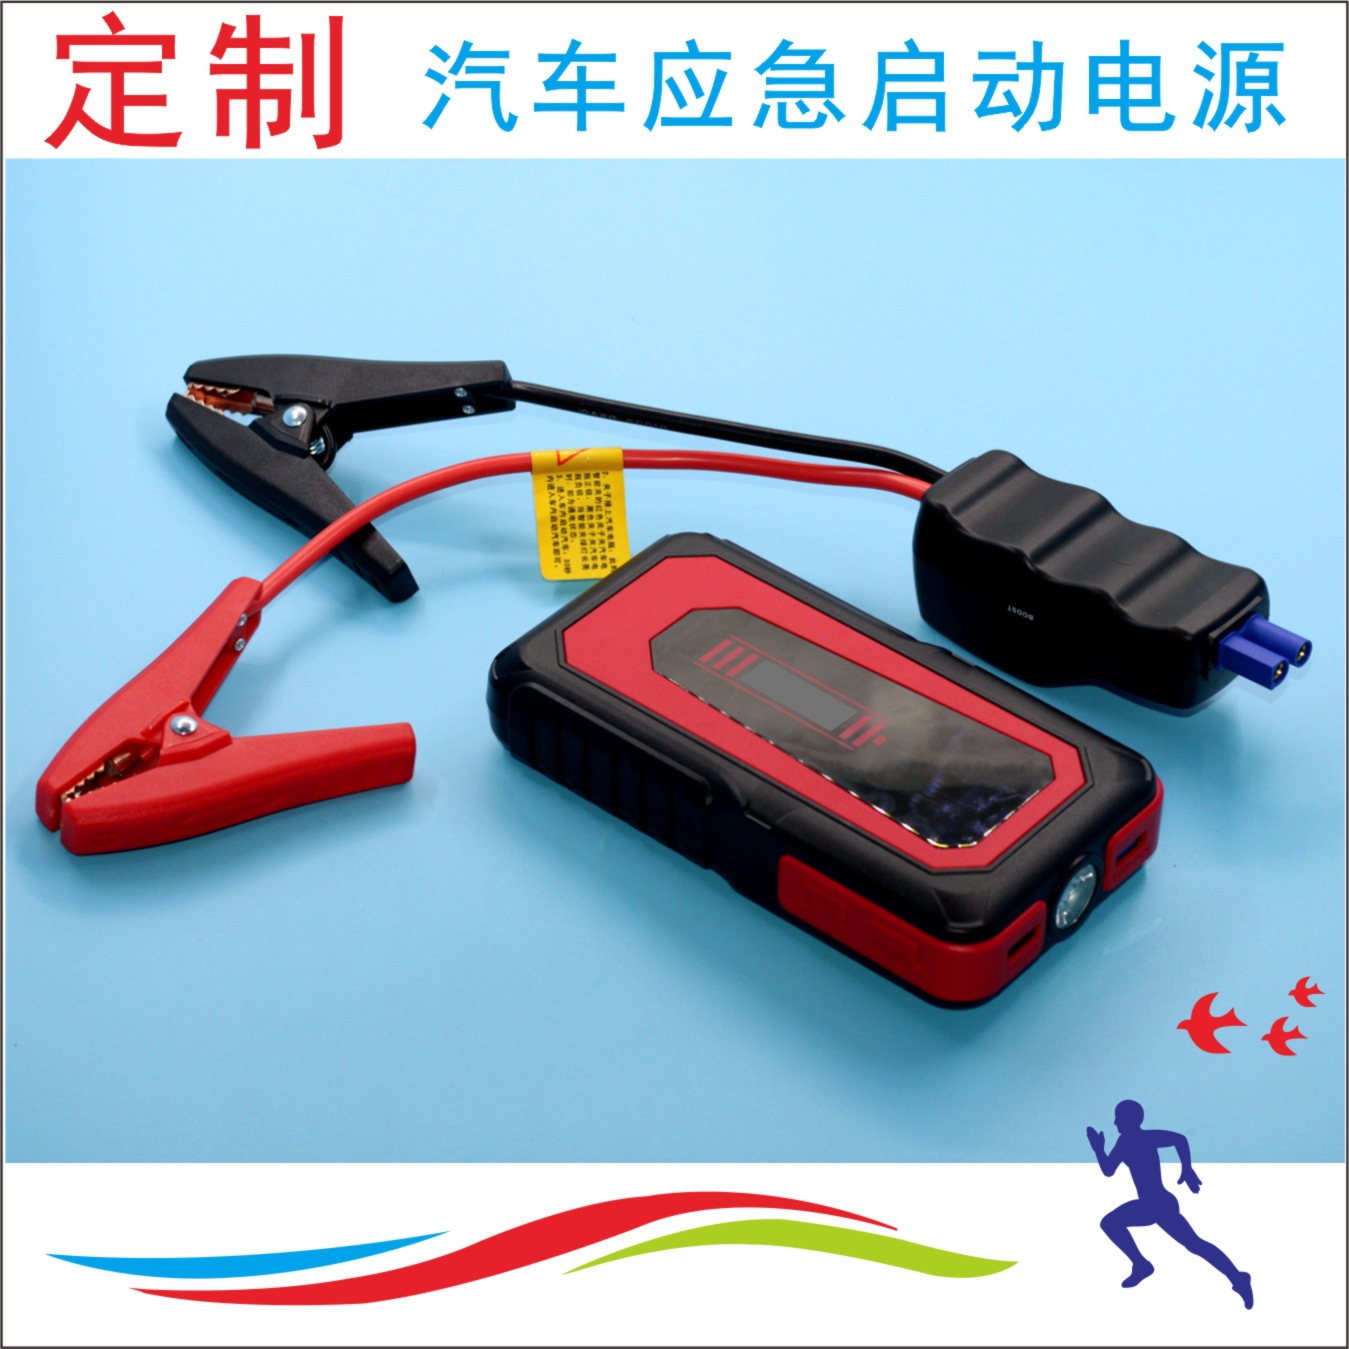 10000mAH automobile Meet an emergency Turn on the power Gasoline and diesel Edition LED Meet an emergency source move Charger